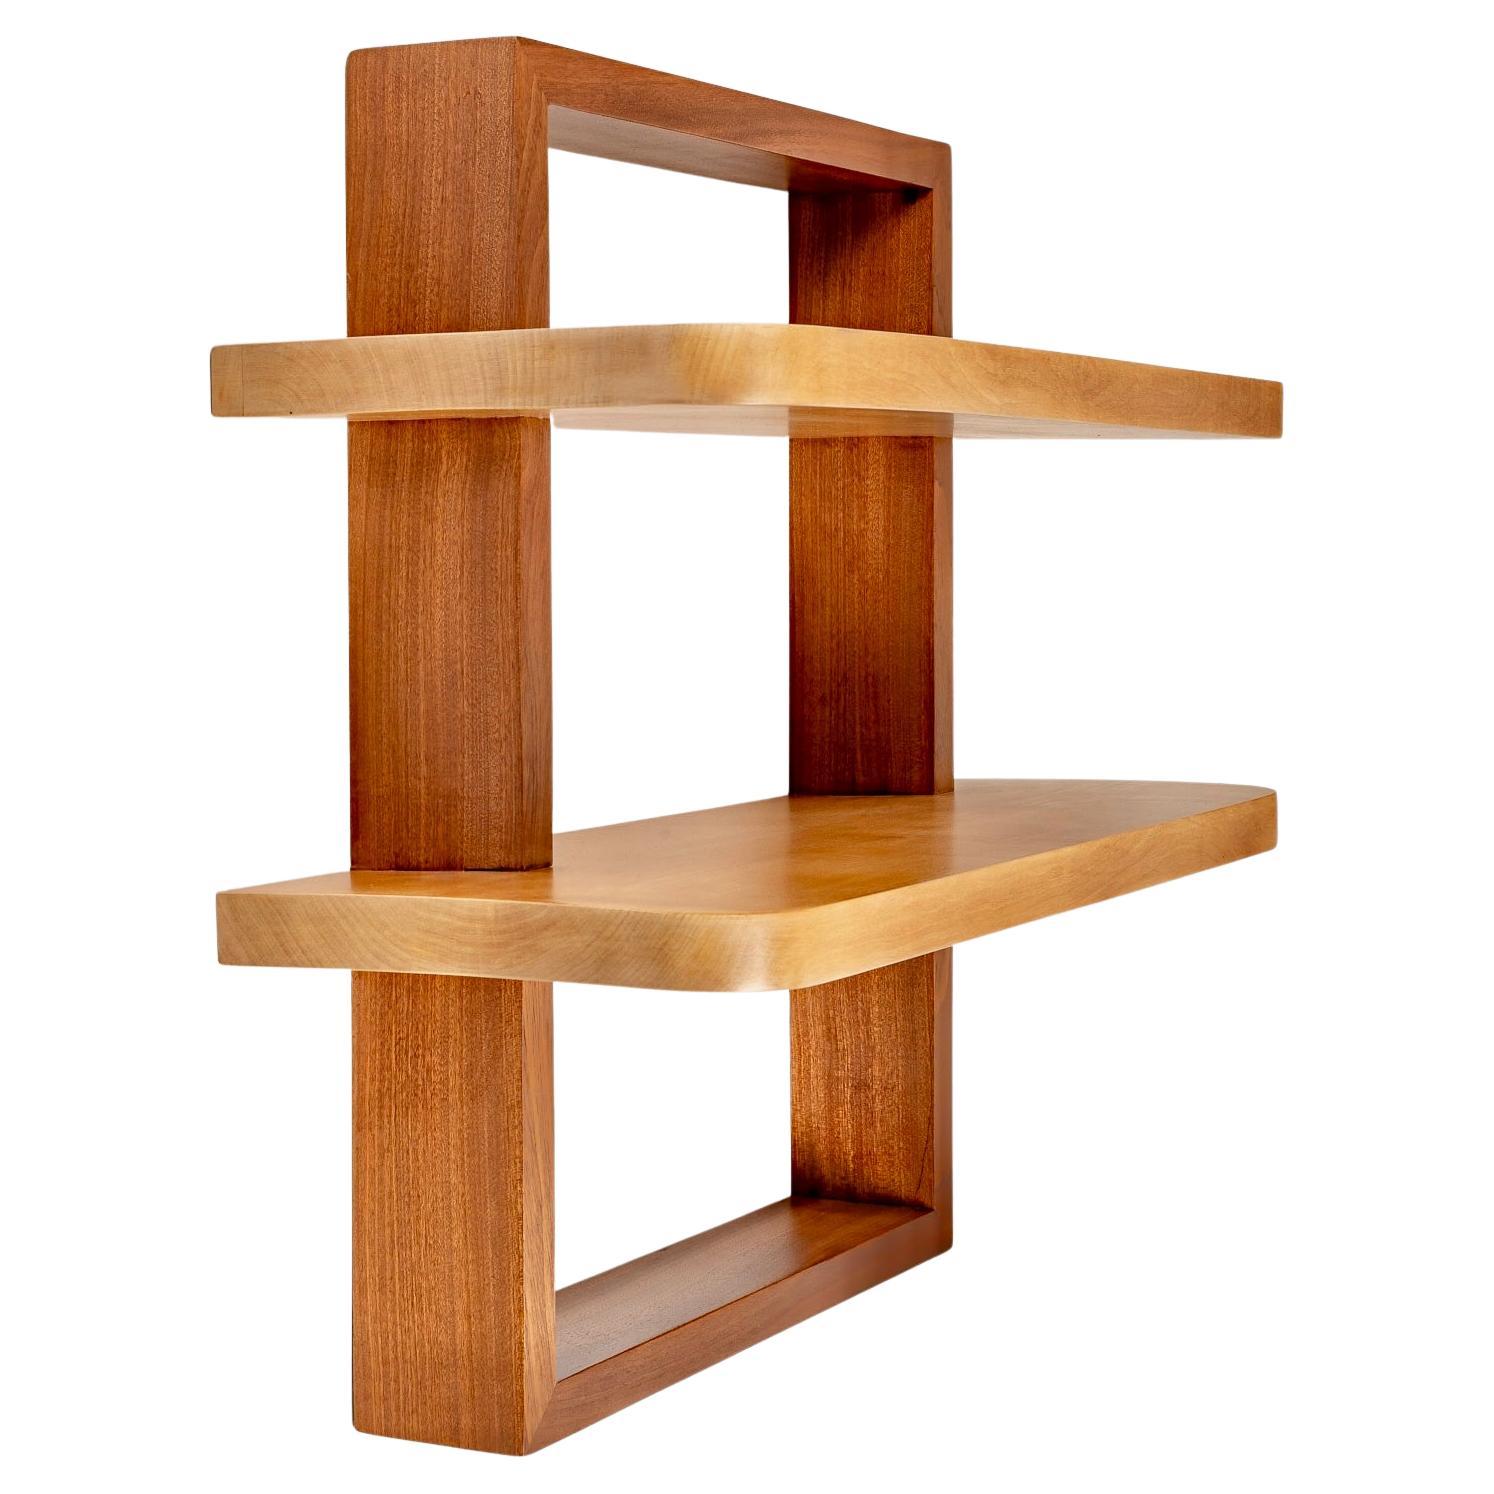 Typical work of the inspiration of the cubist period. 

Composed of a rectangular wall frame suspended in mahogany on which is inserted inside the frame two shelves in beech harmoniously distributed has two different heights in light beech